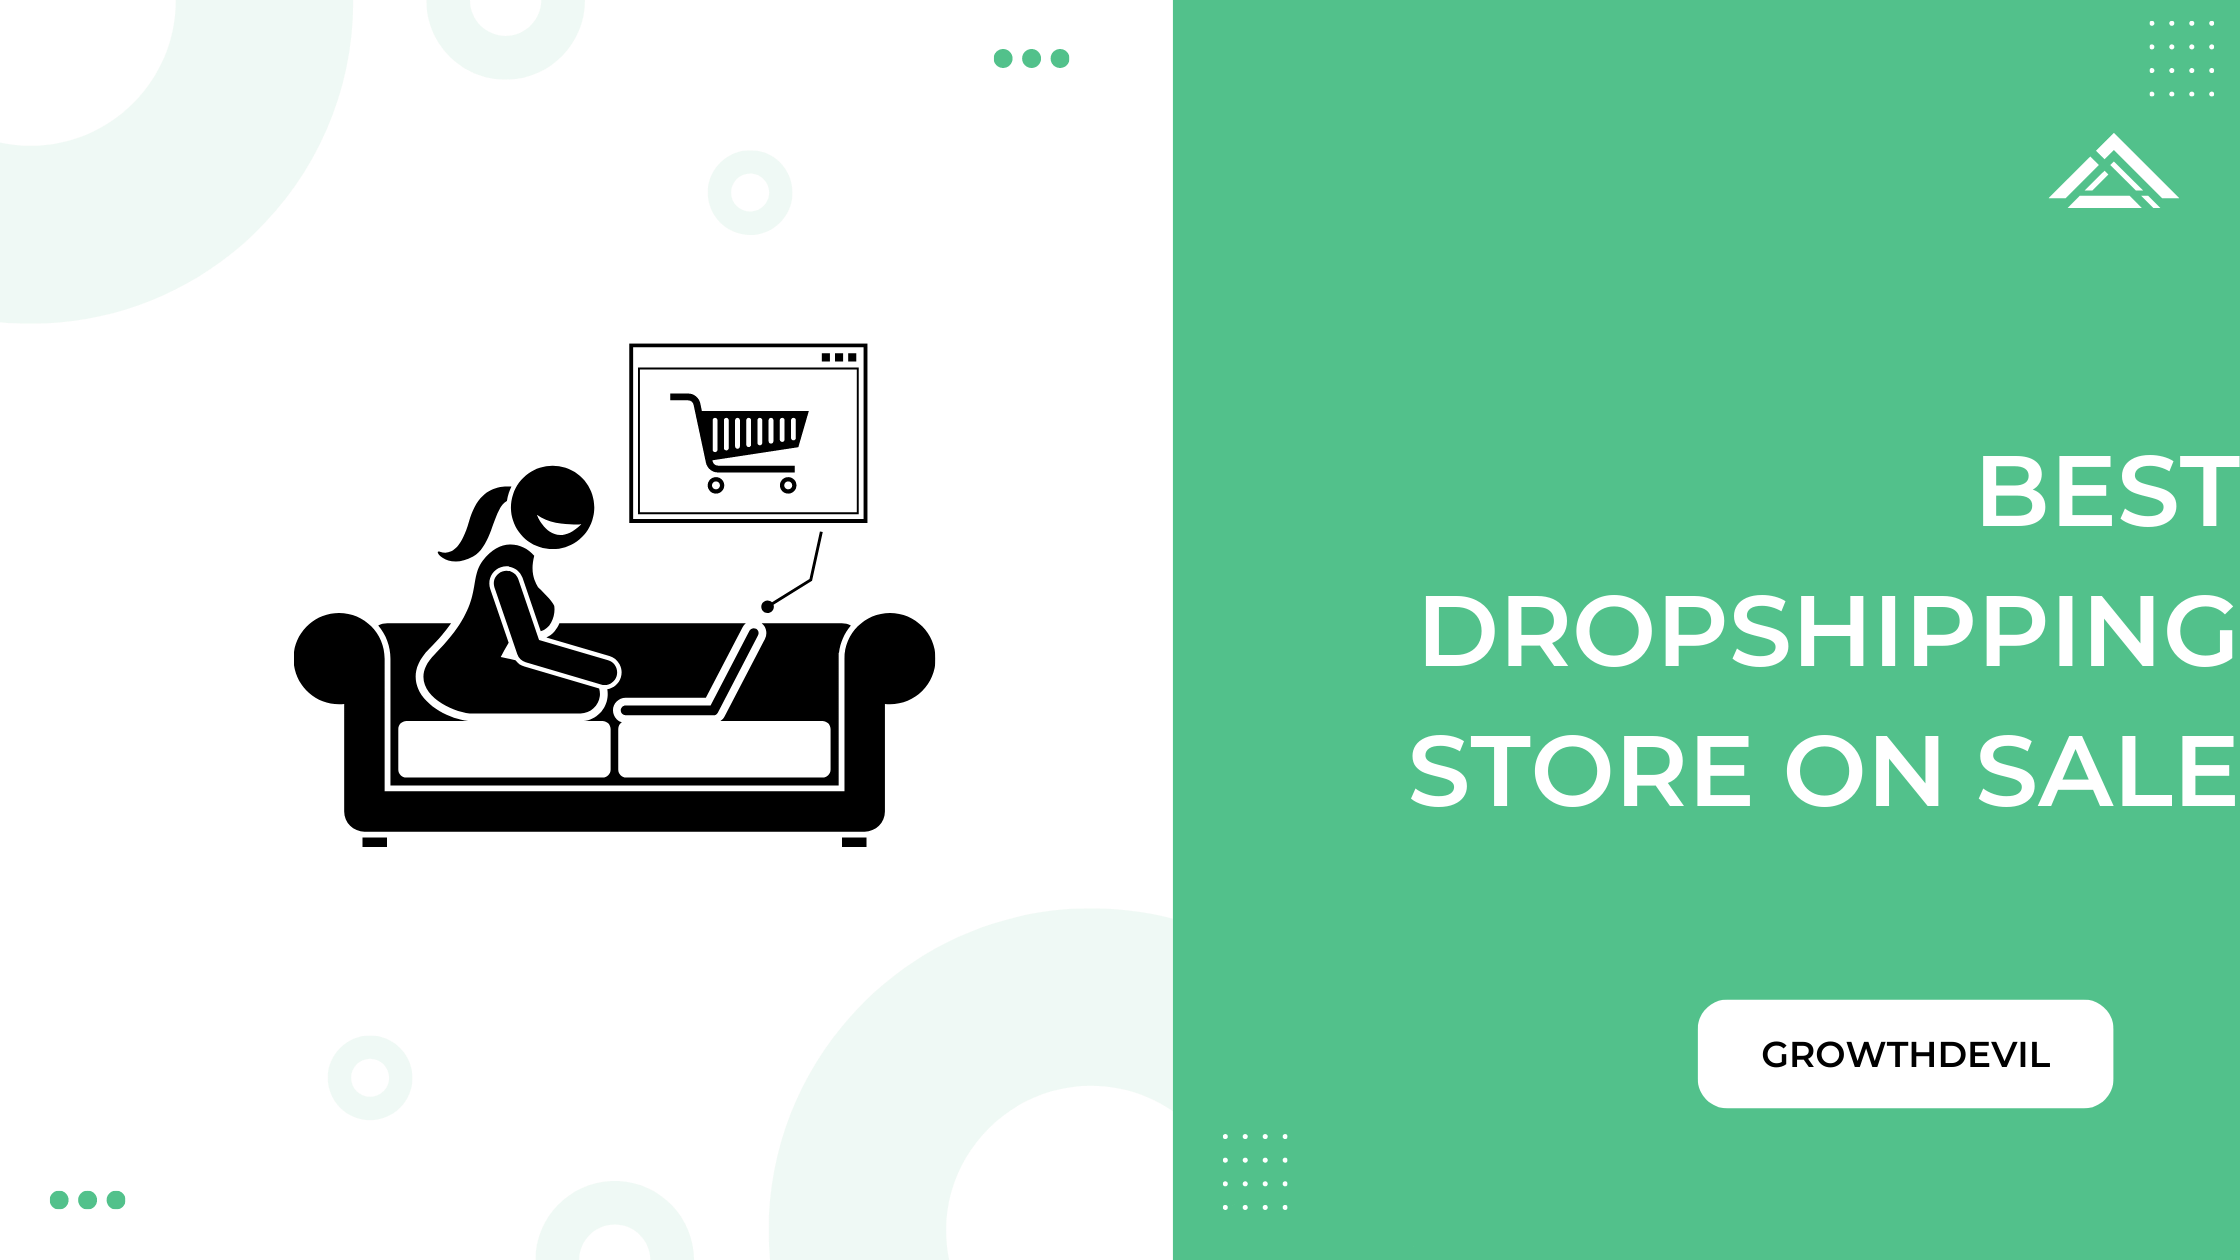 Best Dropshipping Store On Sale - GrowthDevil